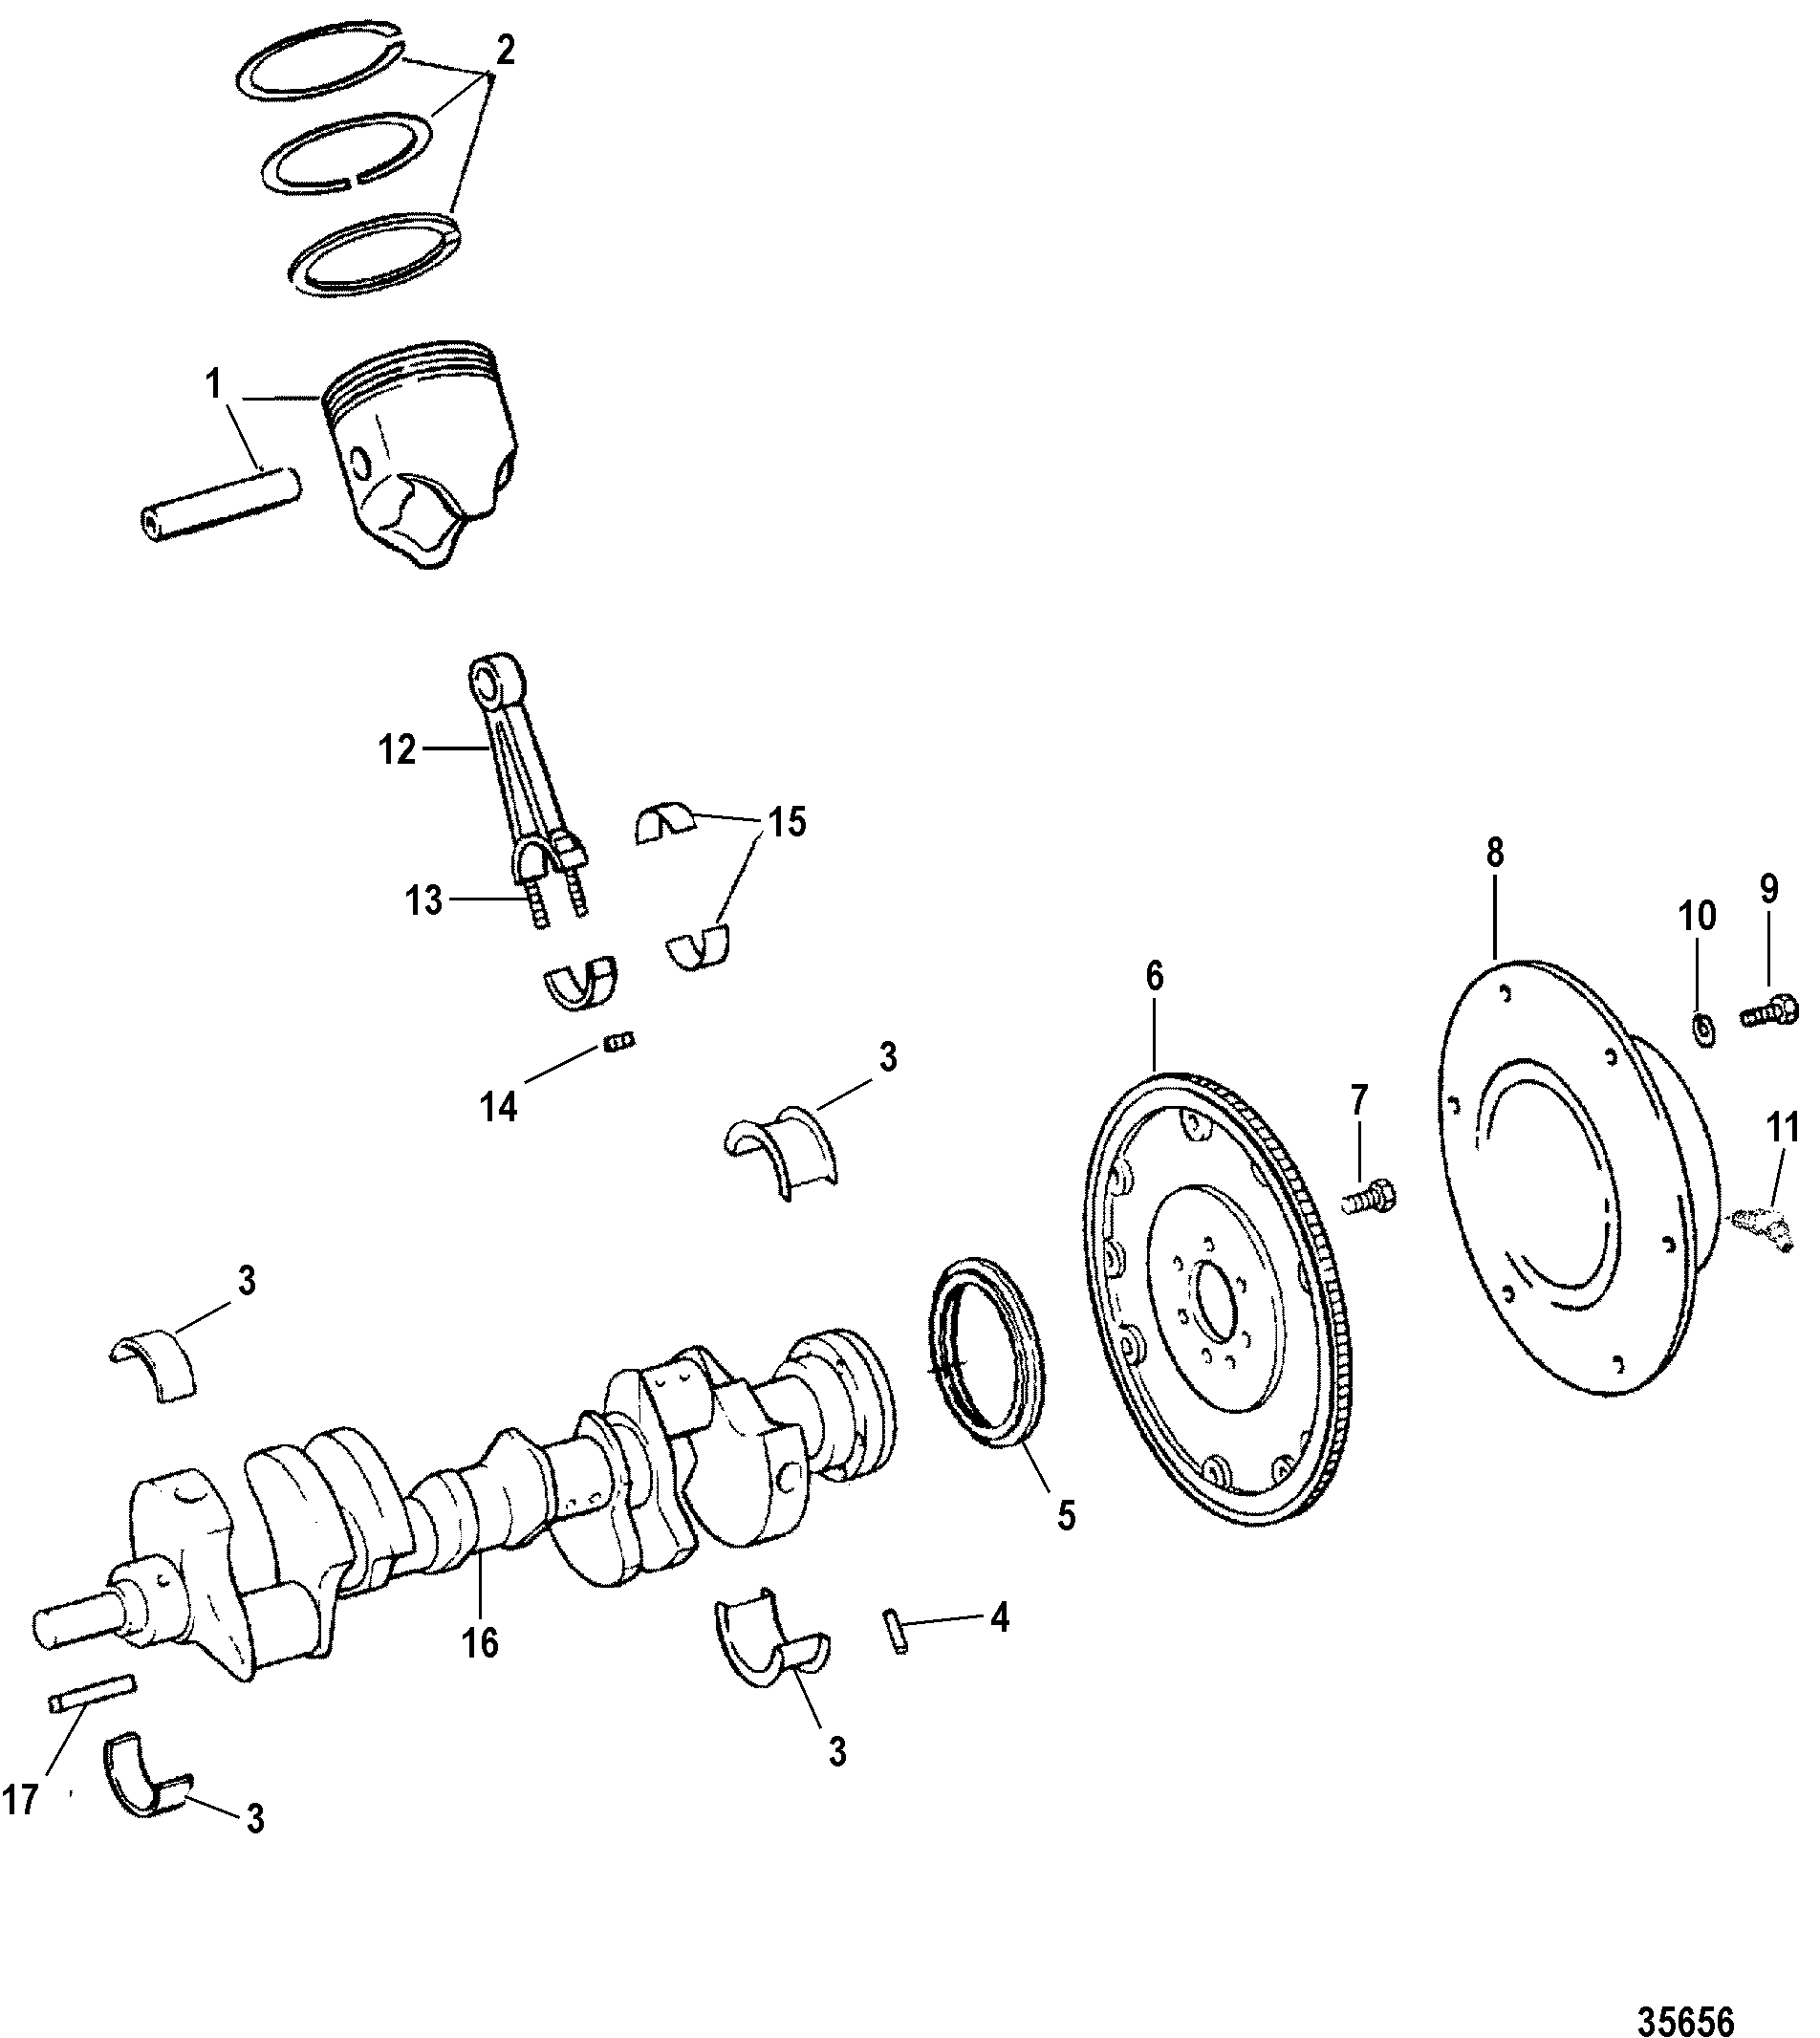 CRANKSHAFT AND CONNECTING RODS